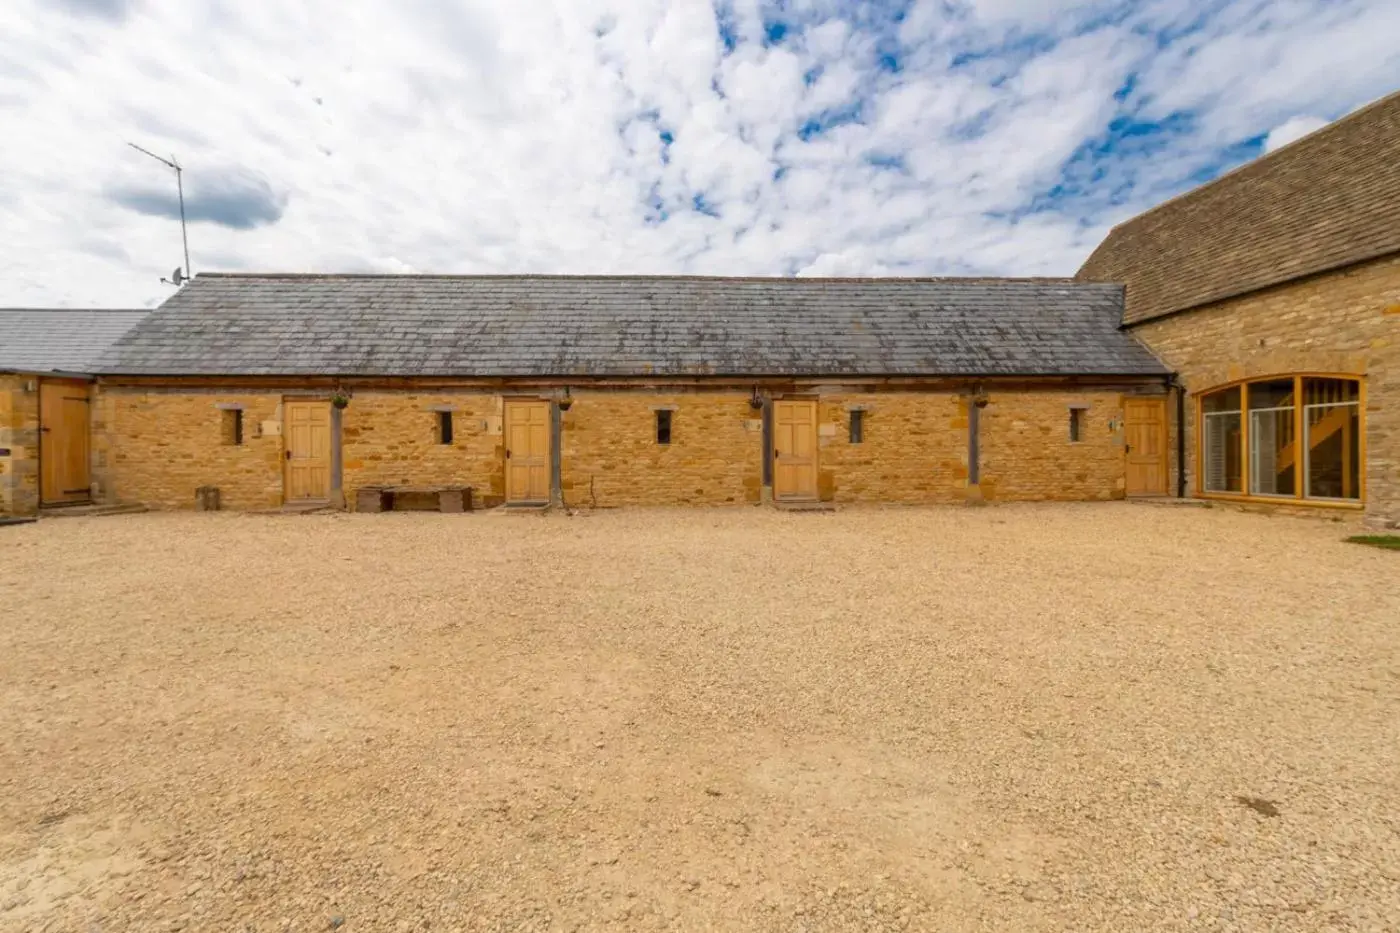 Inner courtyard view, Property Building in Mill Cottage - Ash Farm Cotswolds